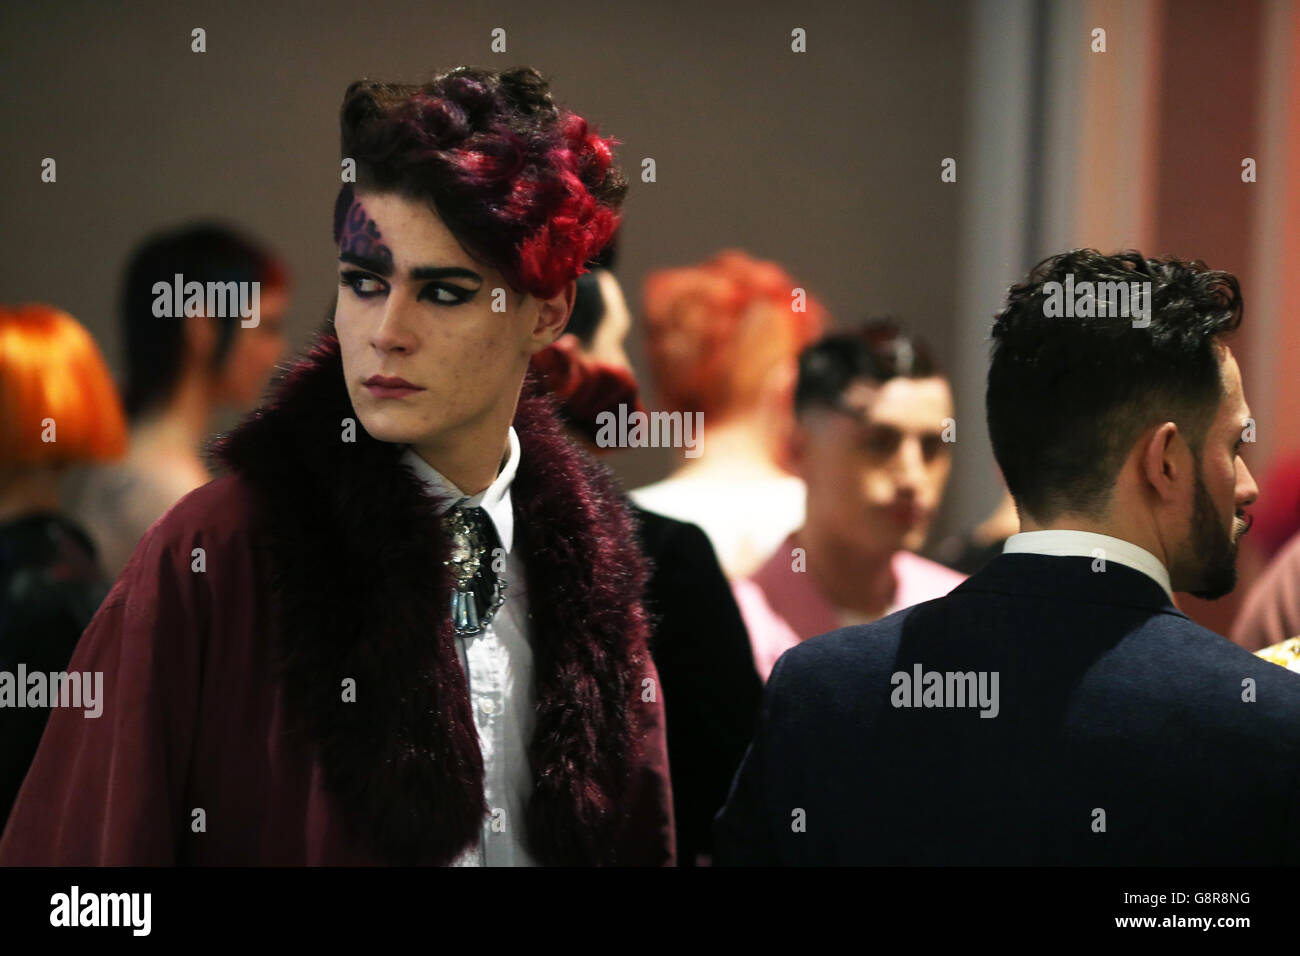 Models gather for the competition during the Irish Hairdressing Championsips at the Double Tree by Hilton hotel in Dublin. Stock Photo